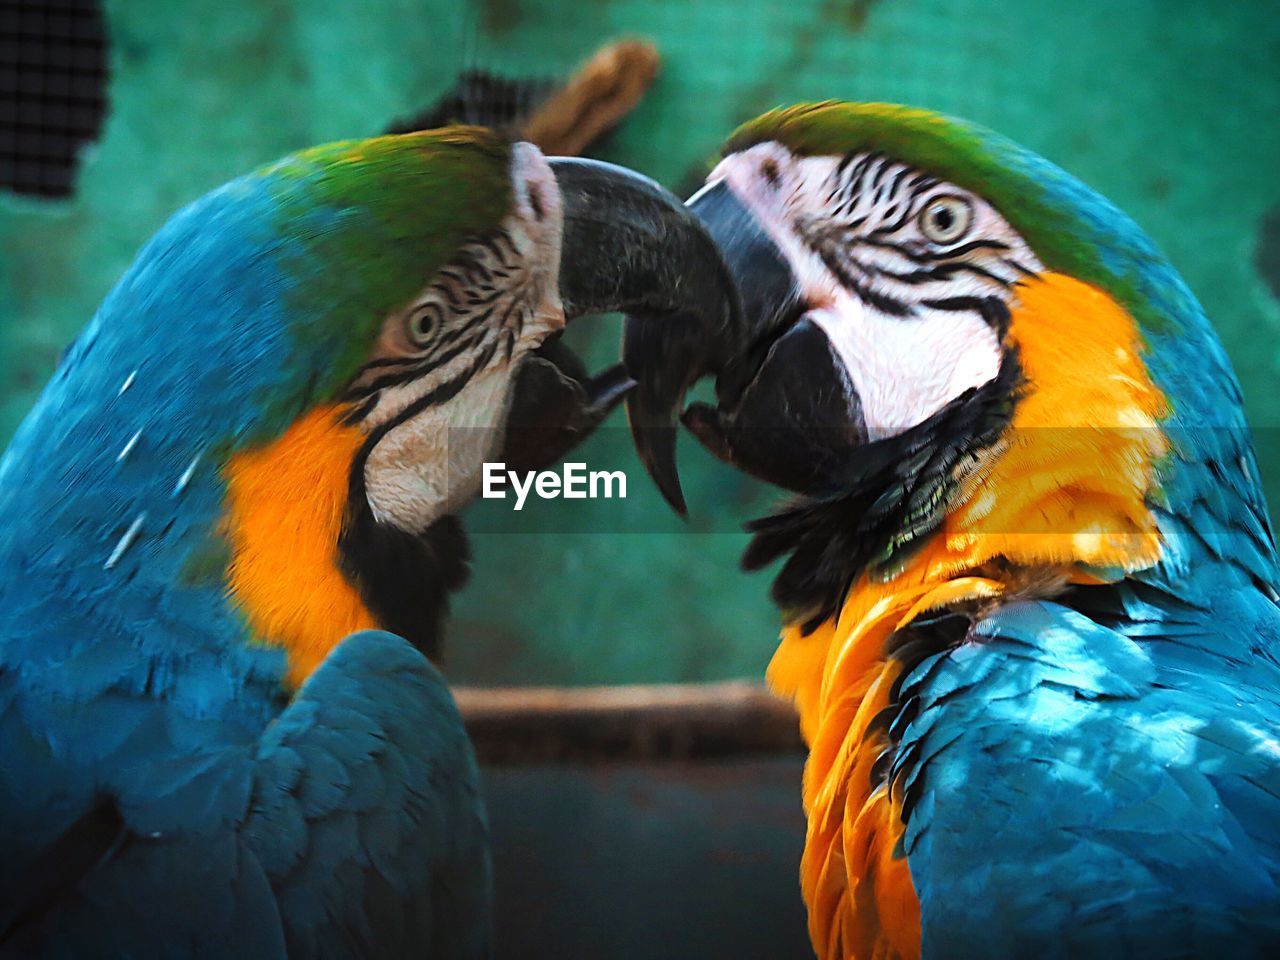 Close-up of two birds in love